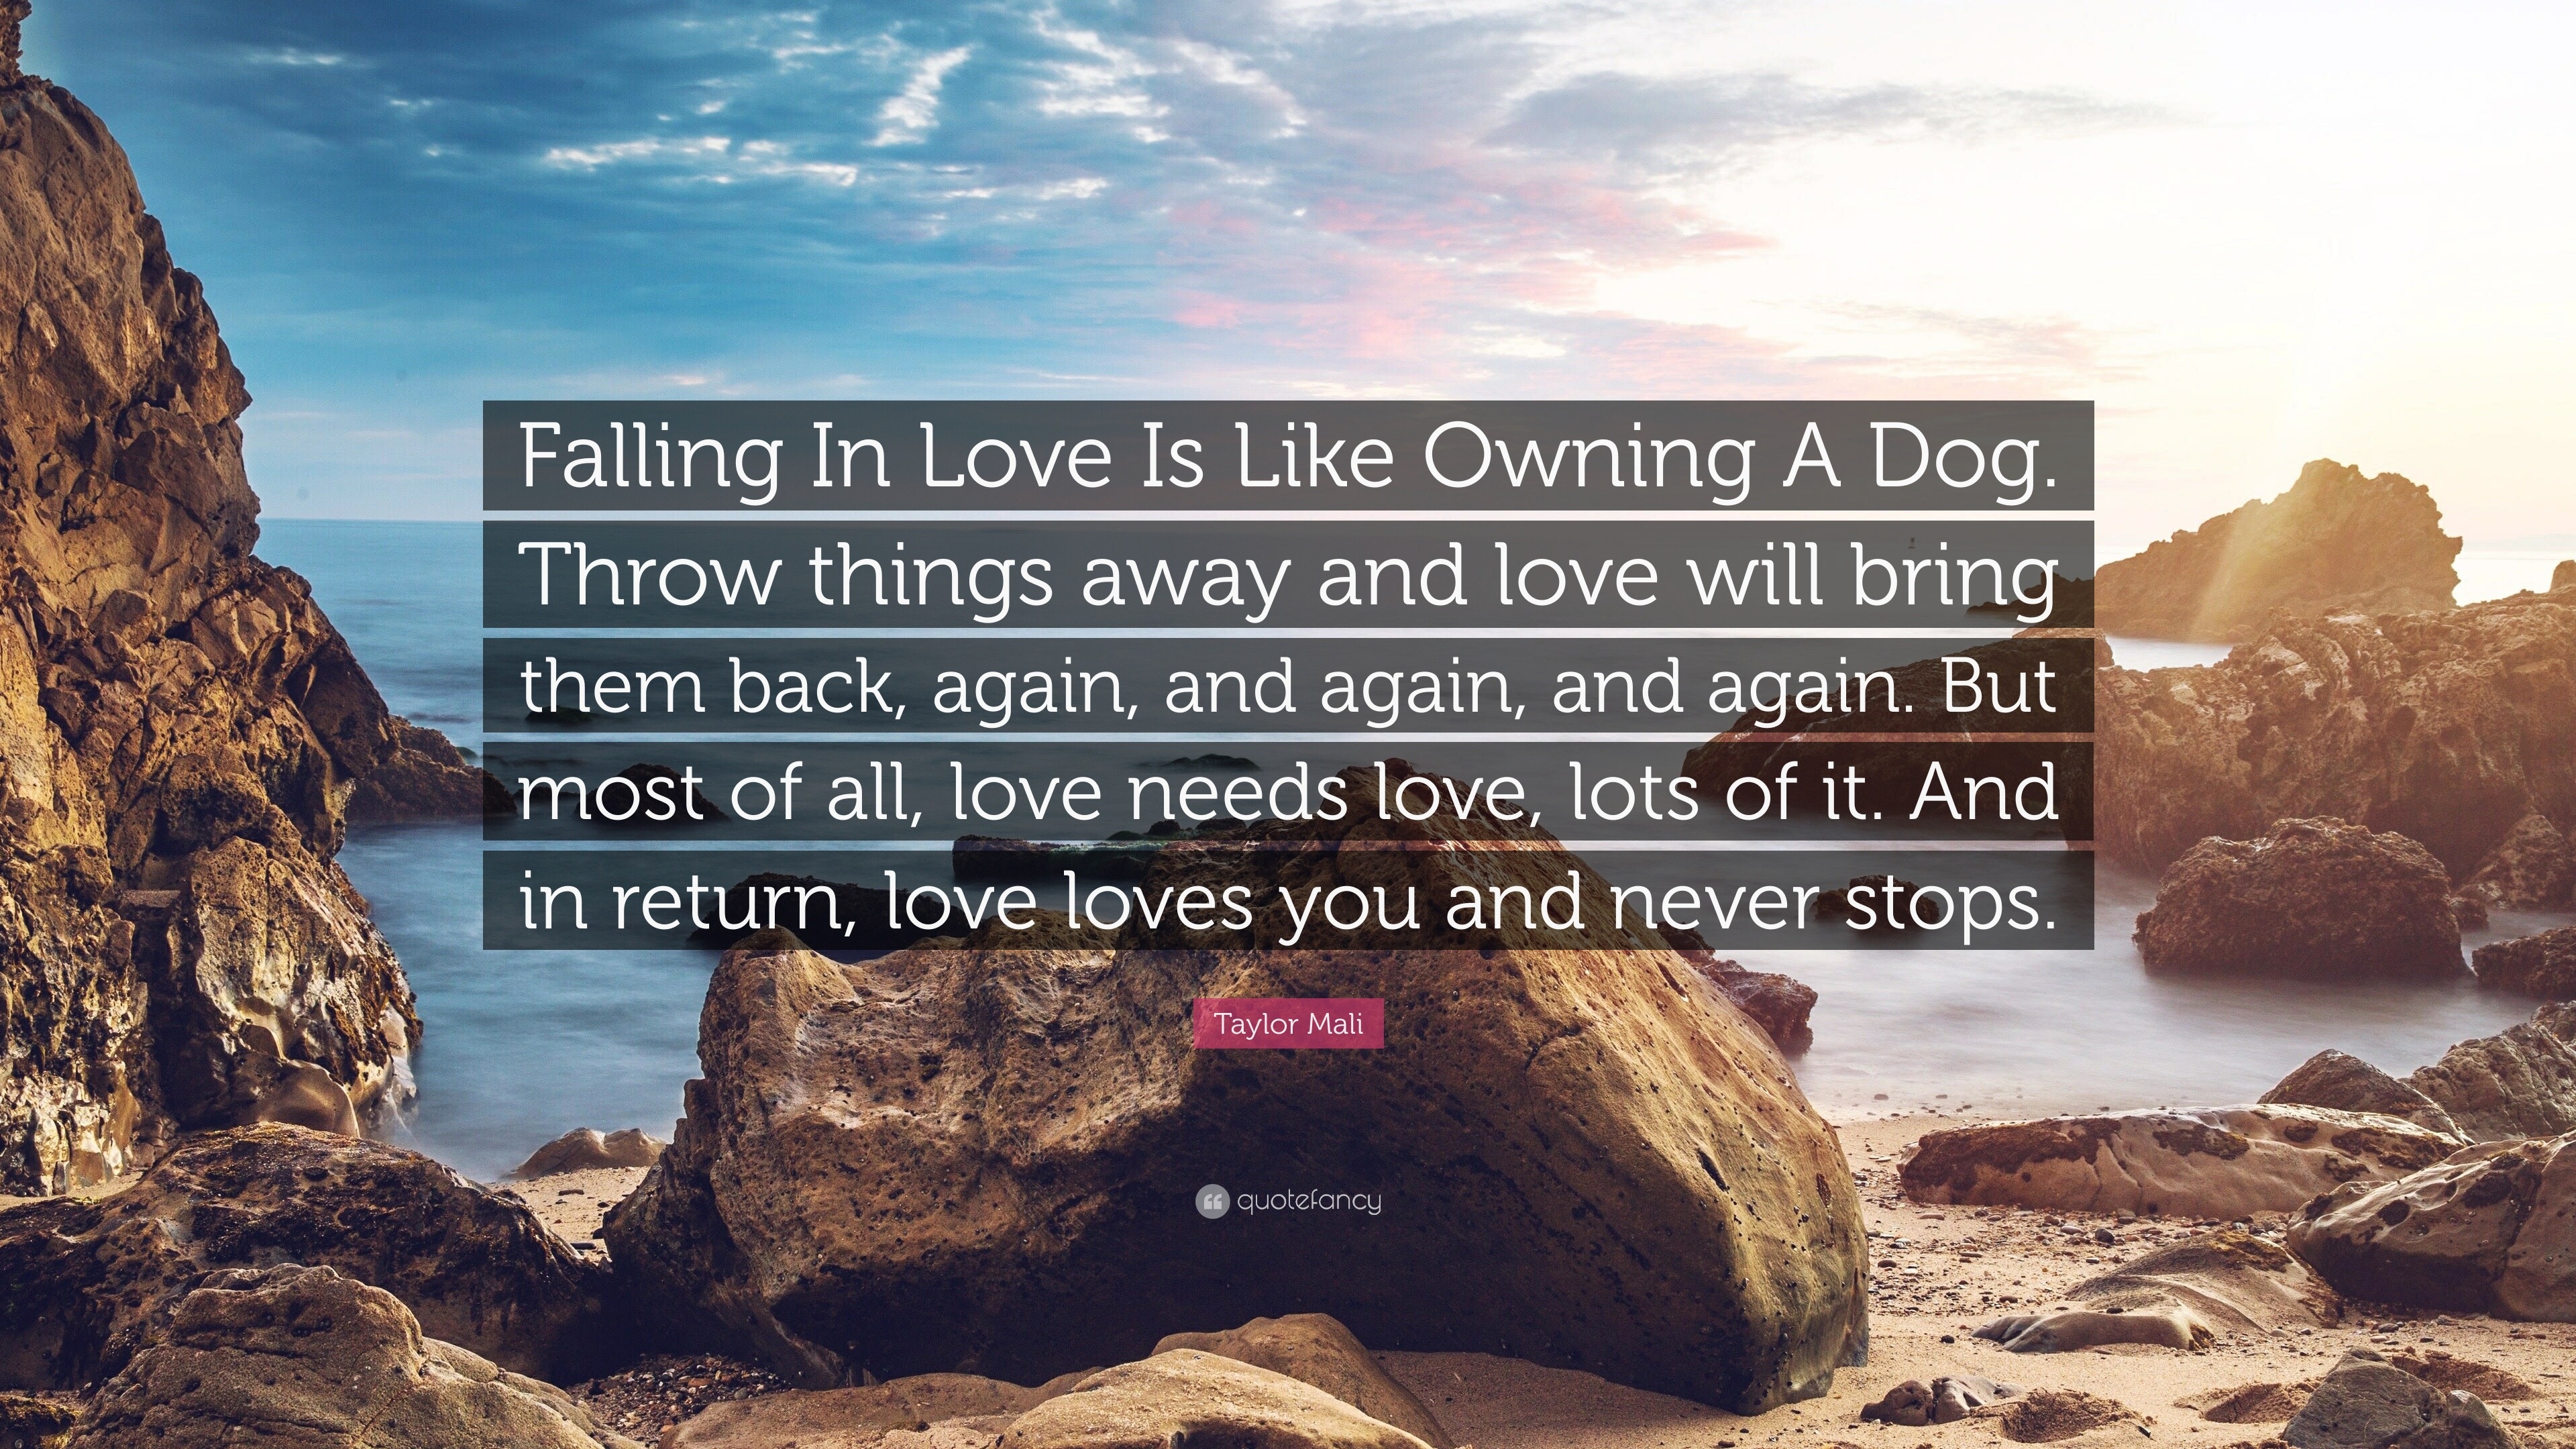 Taylor Mali Quote “Falling In Love Is Like Owning A Dog Throw things